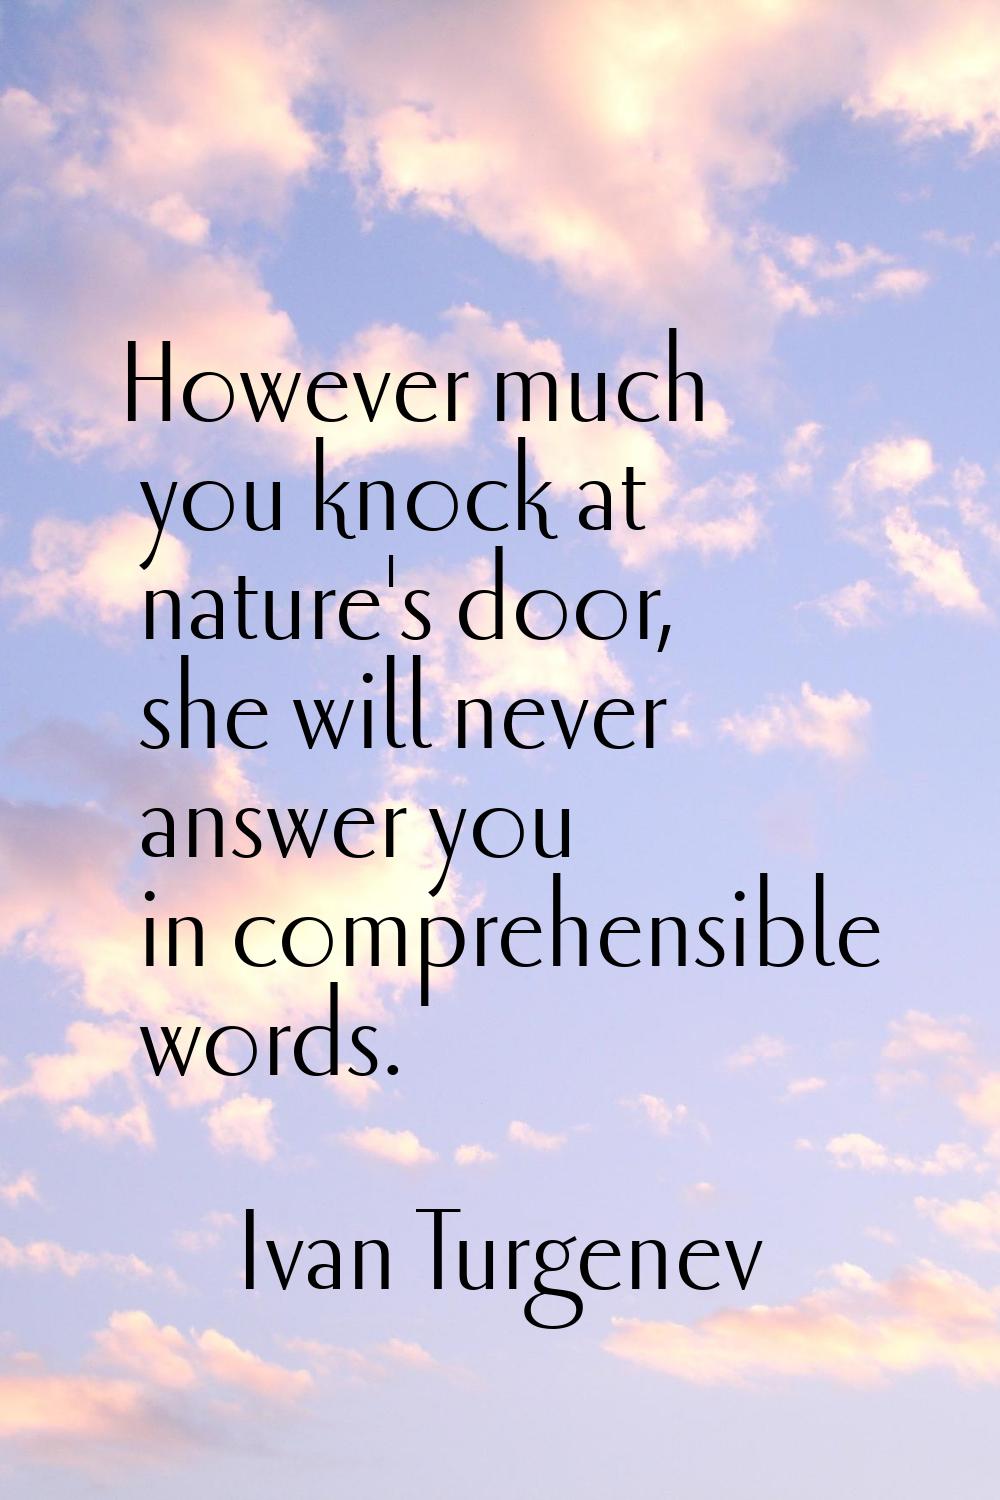 However much you knock at nature's door, she will never answer you in comprehensible words.